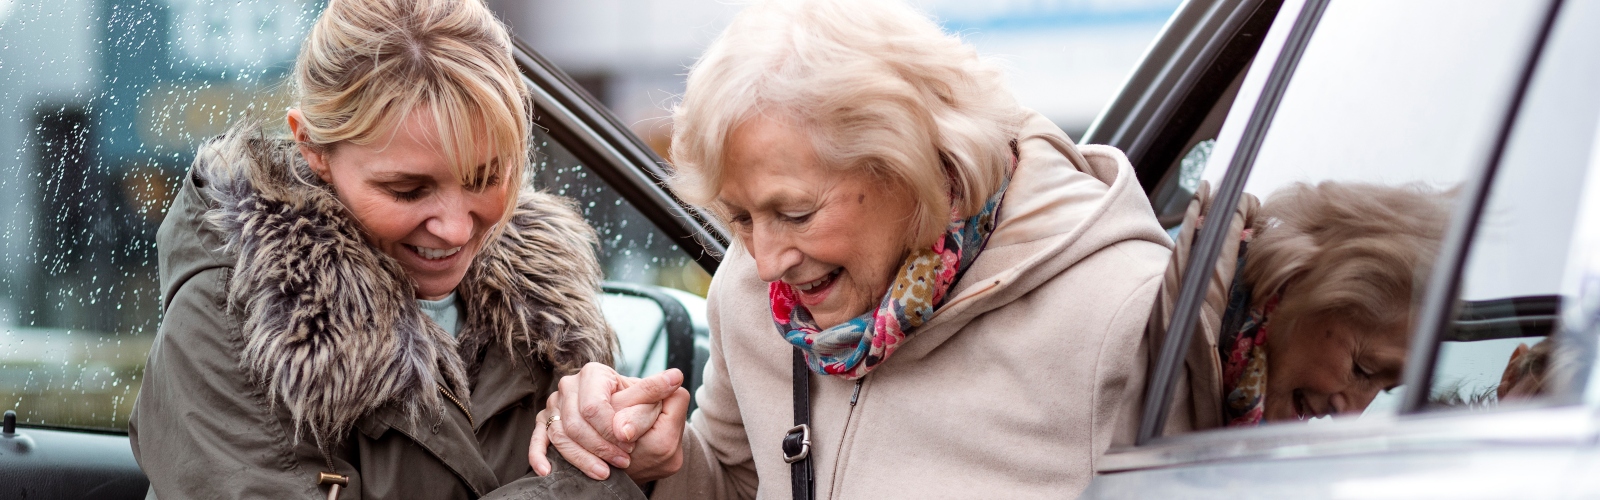 A young woman helps an older woman out of a car